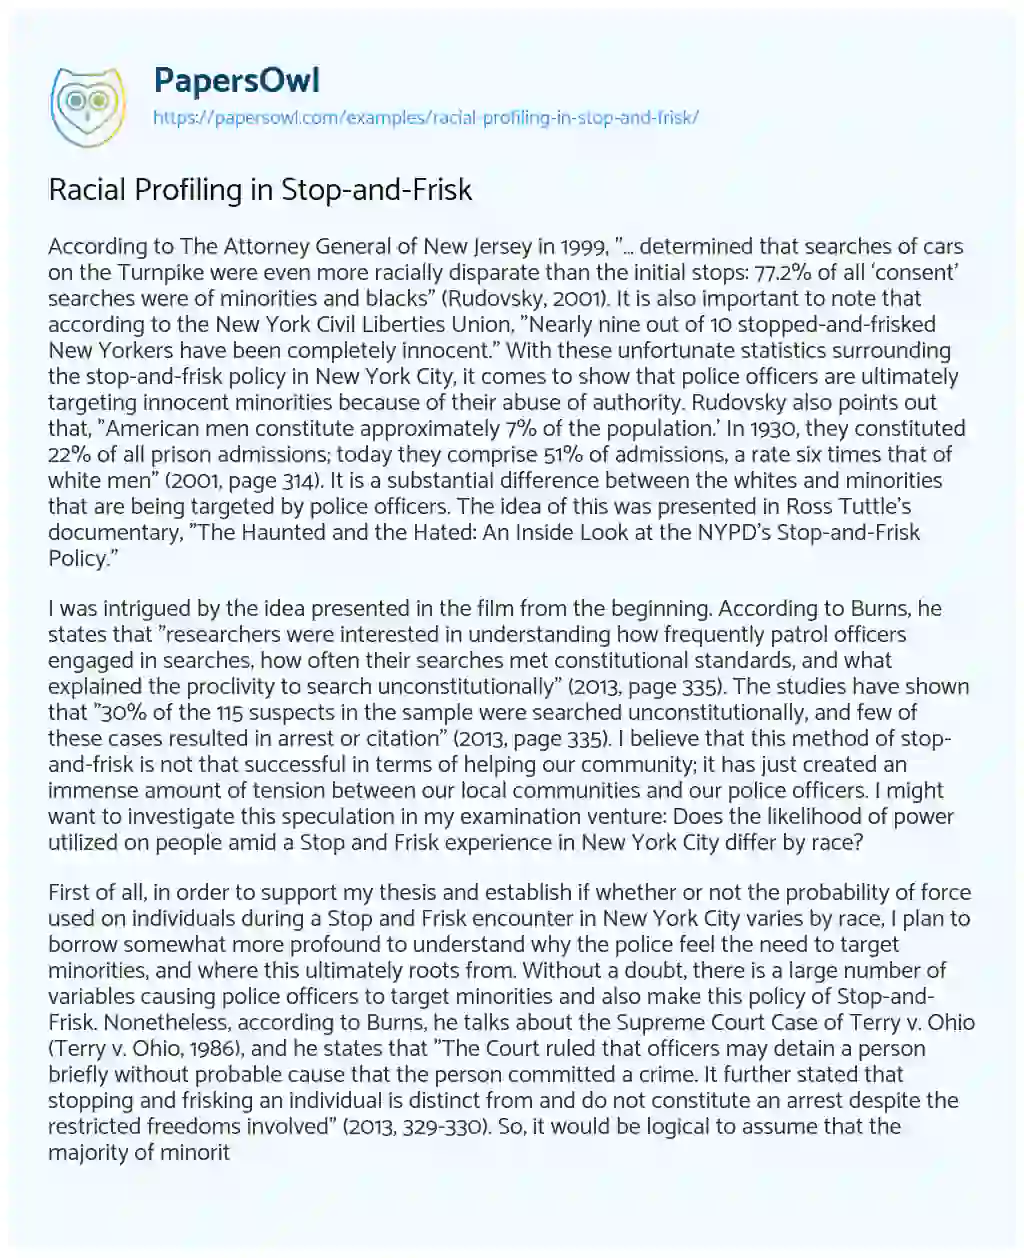 Essay on Racial Profiling in Stop-and-Frisk